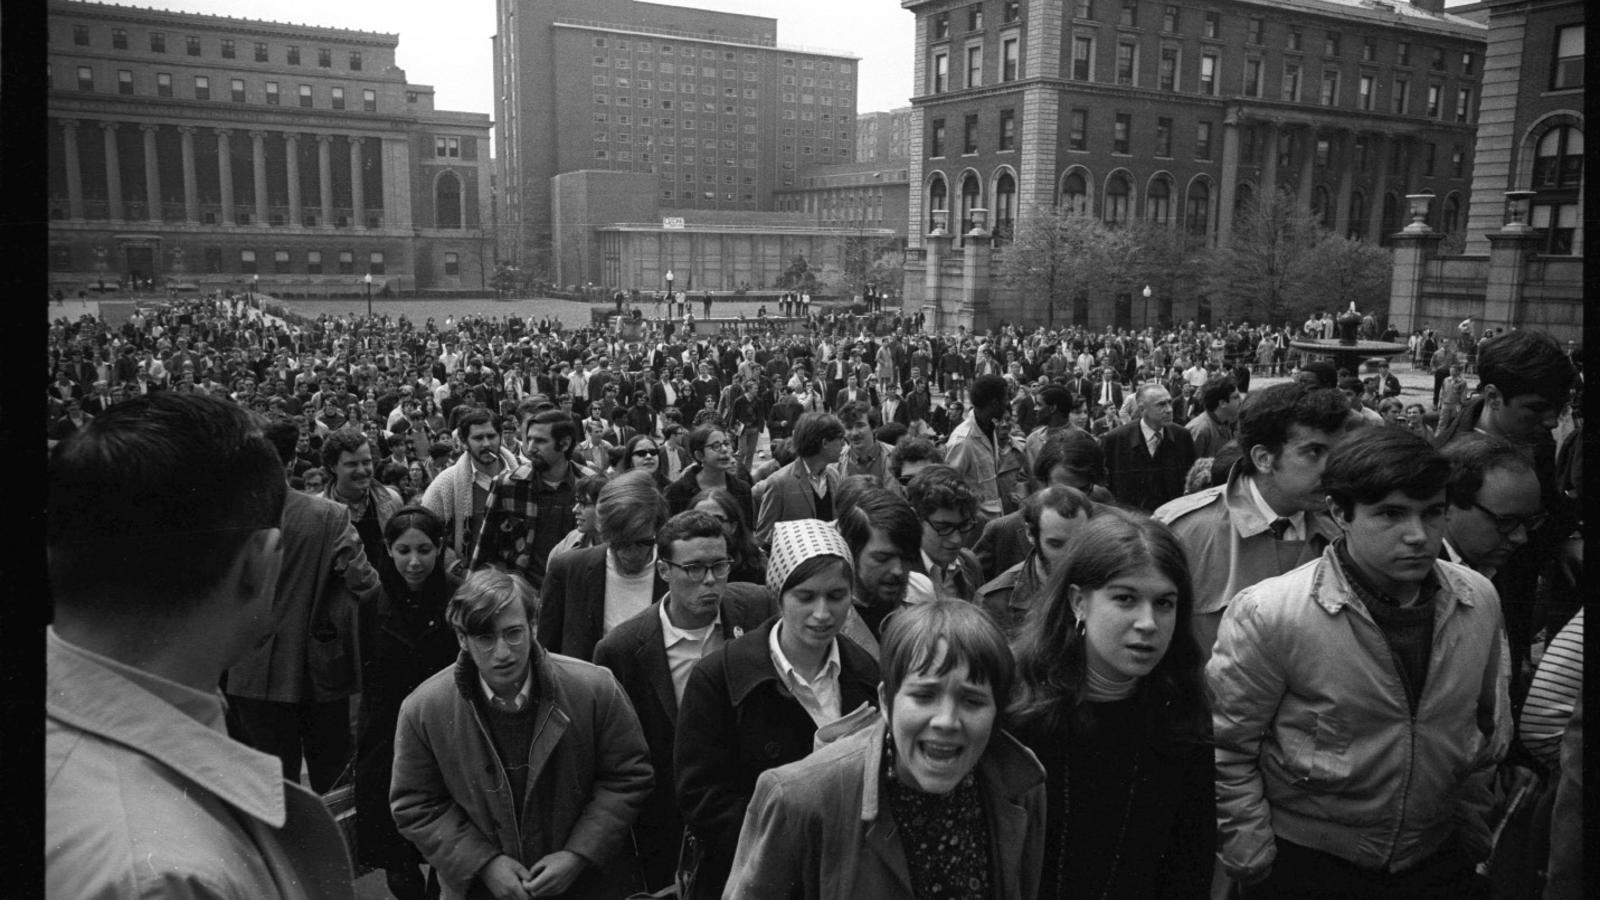 1968 student demonstration at Columbia